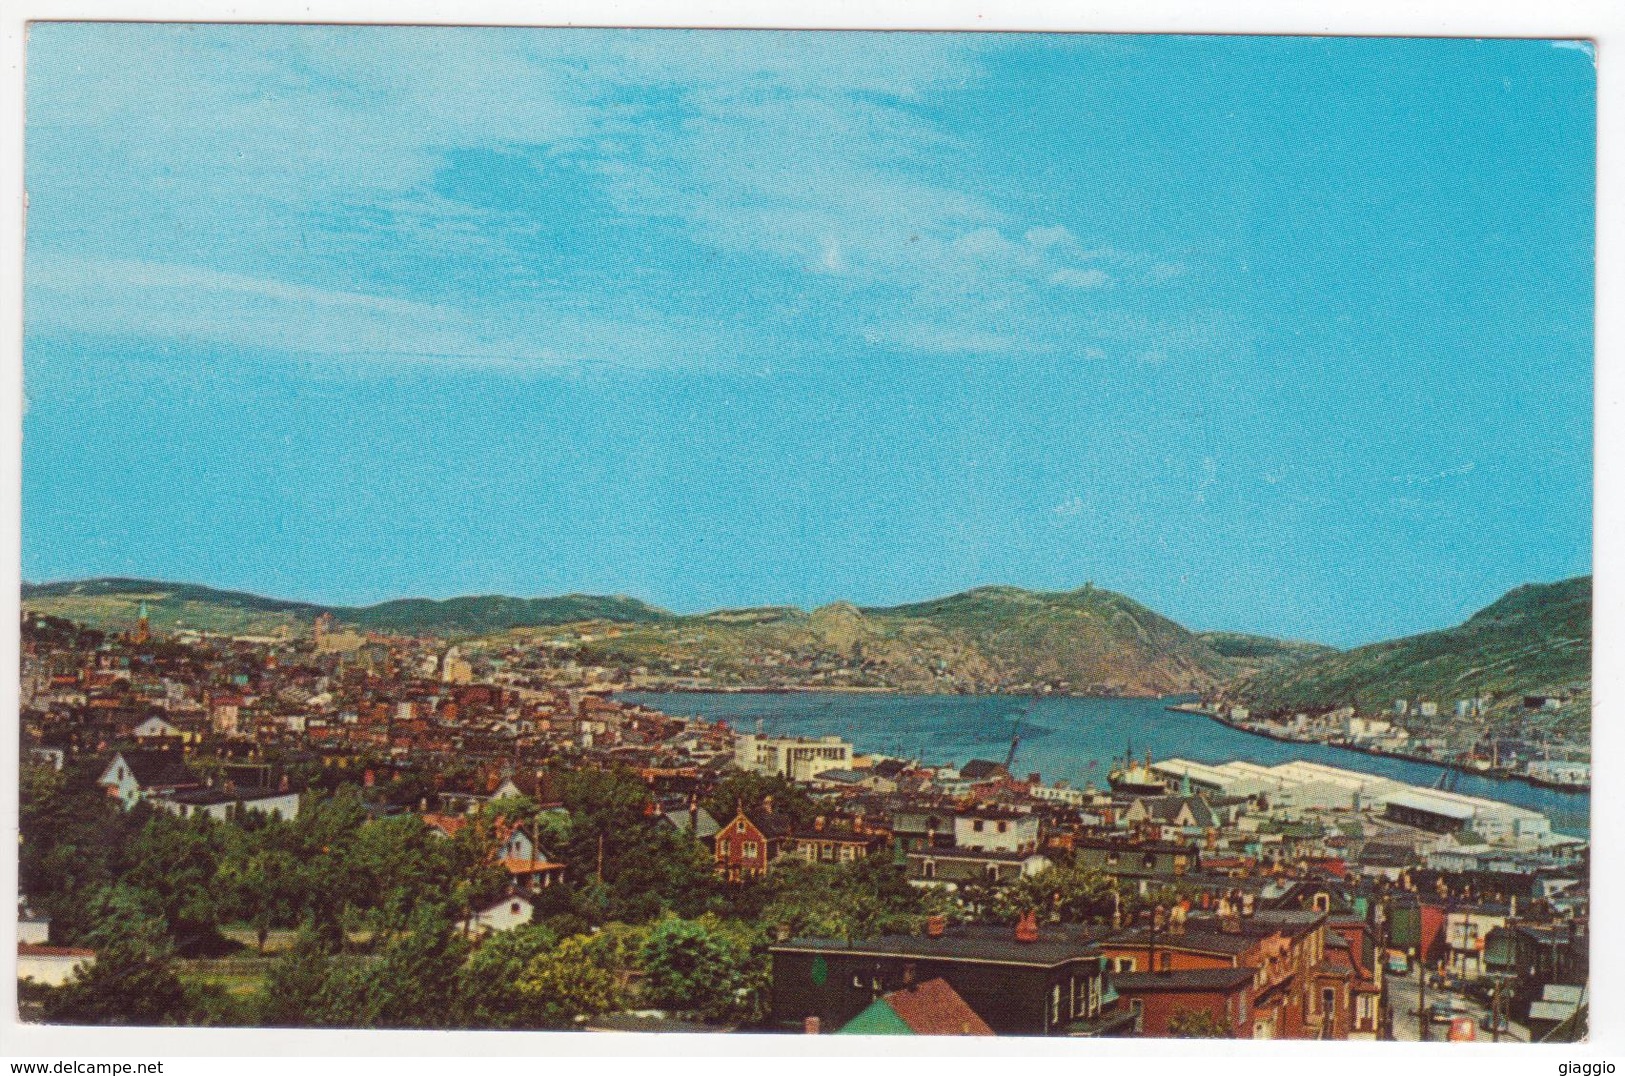 °°° 13749 - CANADA - VIEW OF CITY AND HARBOUR OF ST. JOHN'S SHOWING THE FINGER PIER - 1964 With Stamps °°° - St. John's